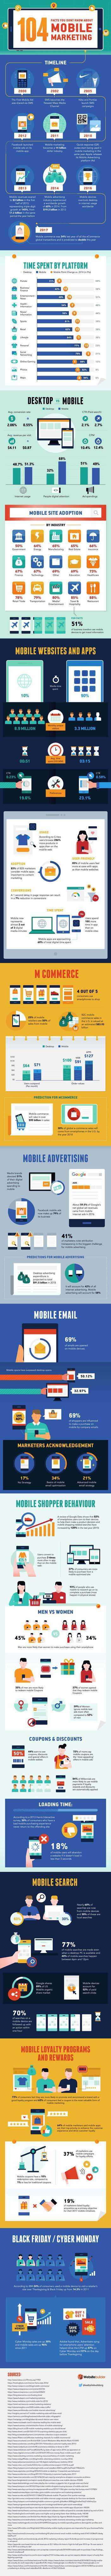 Infographic: 104 Facts You Don’t Know About Mobile Marketing